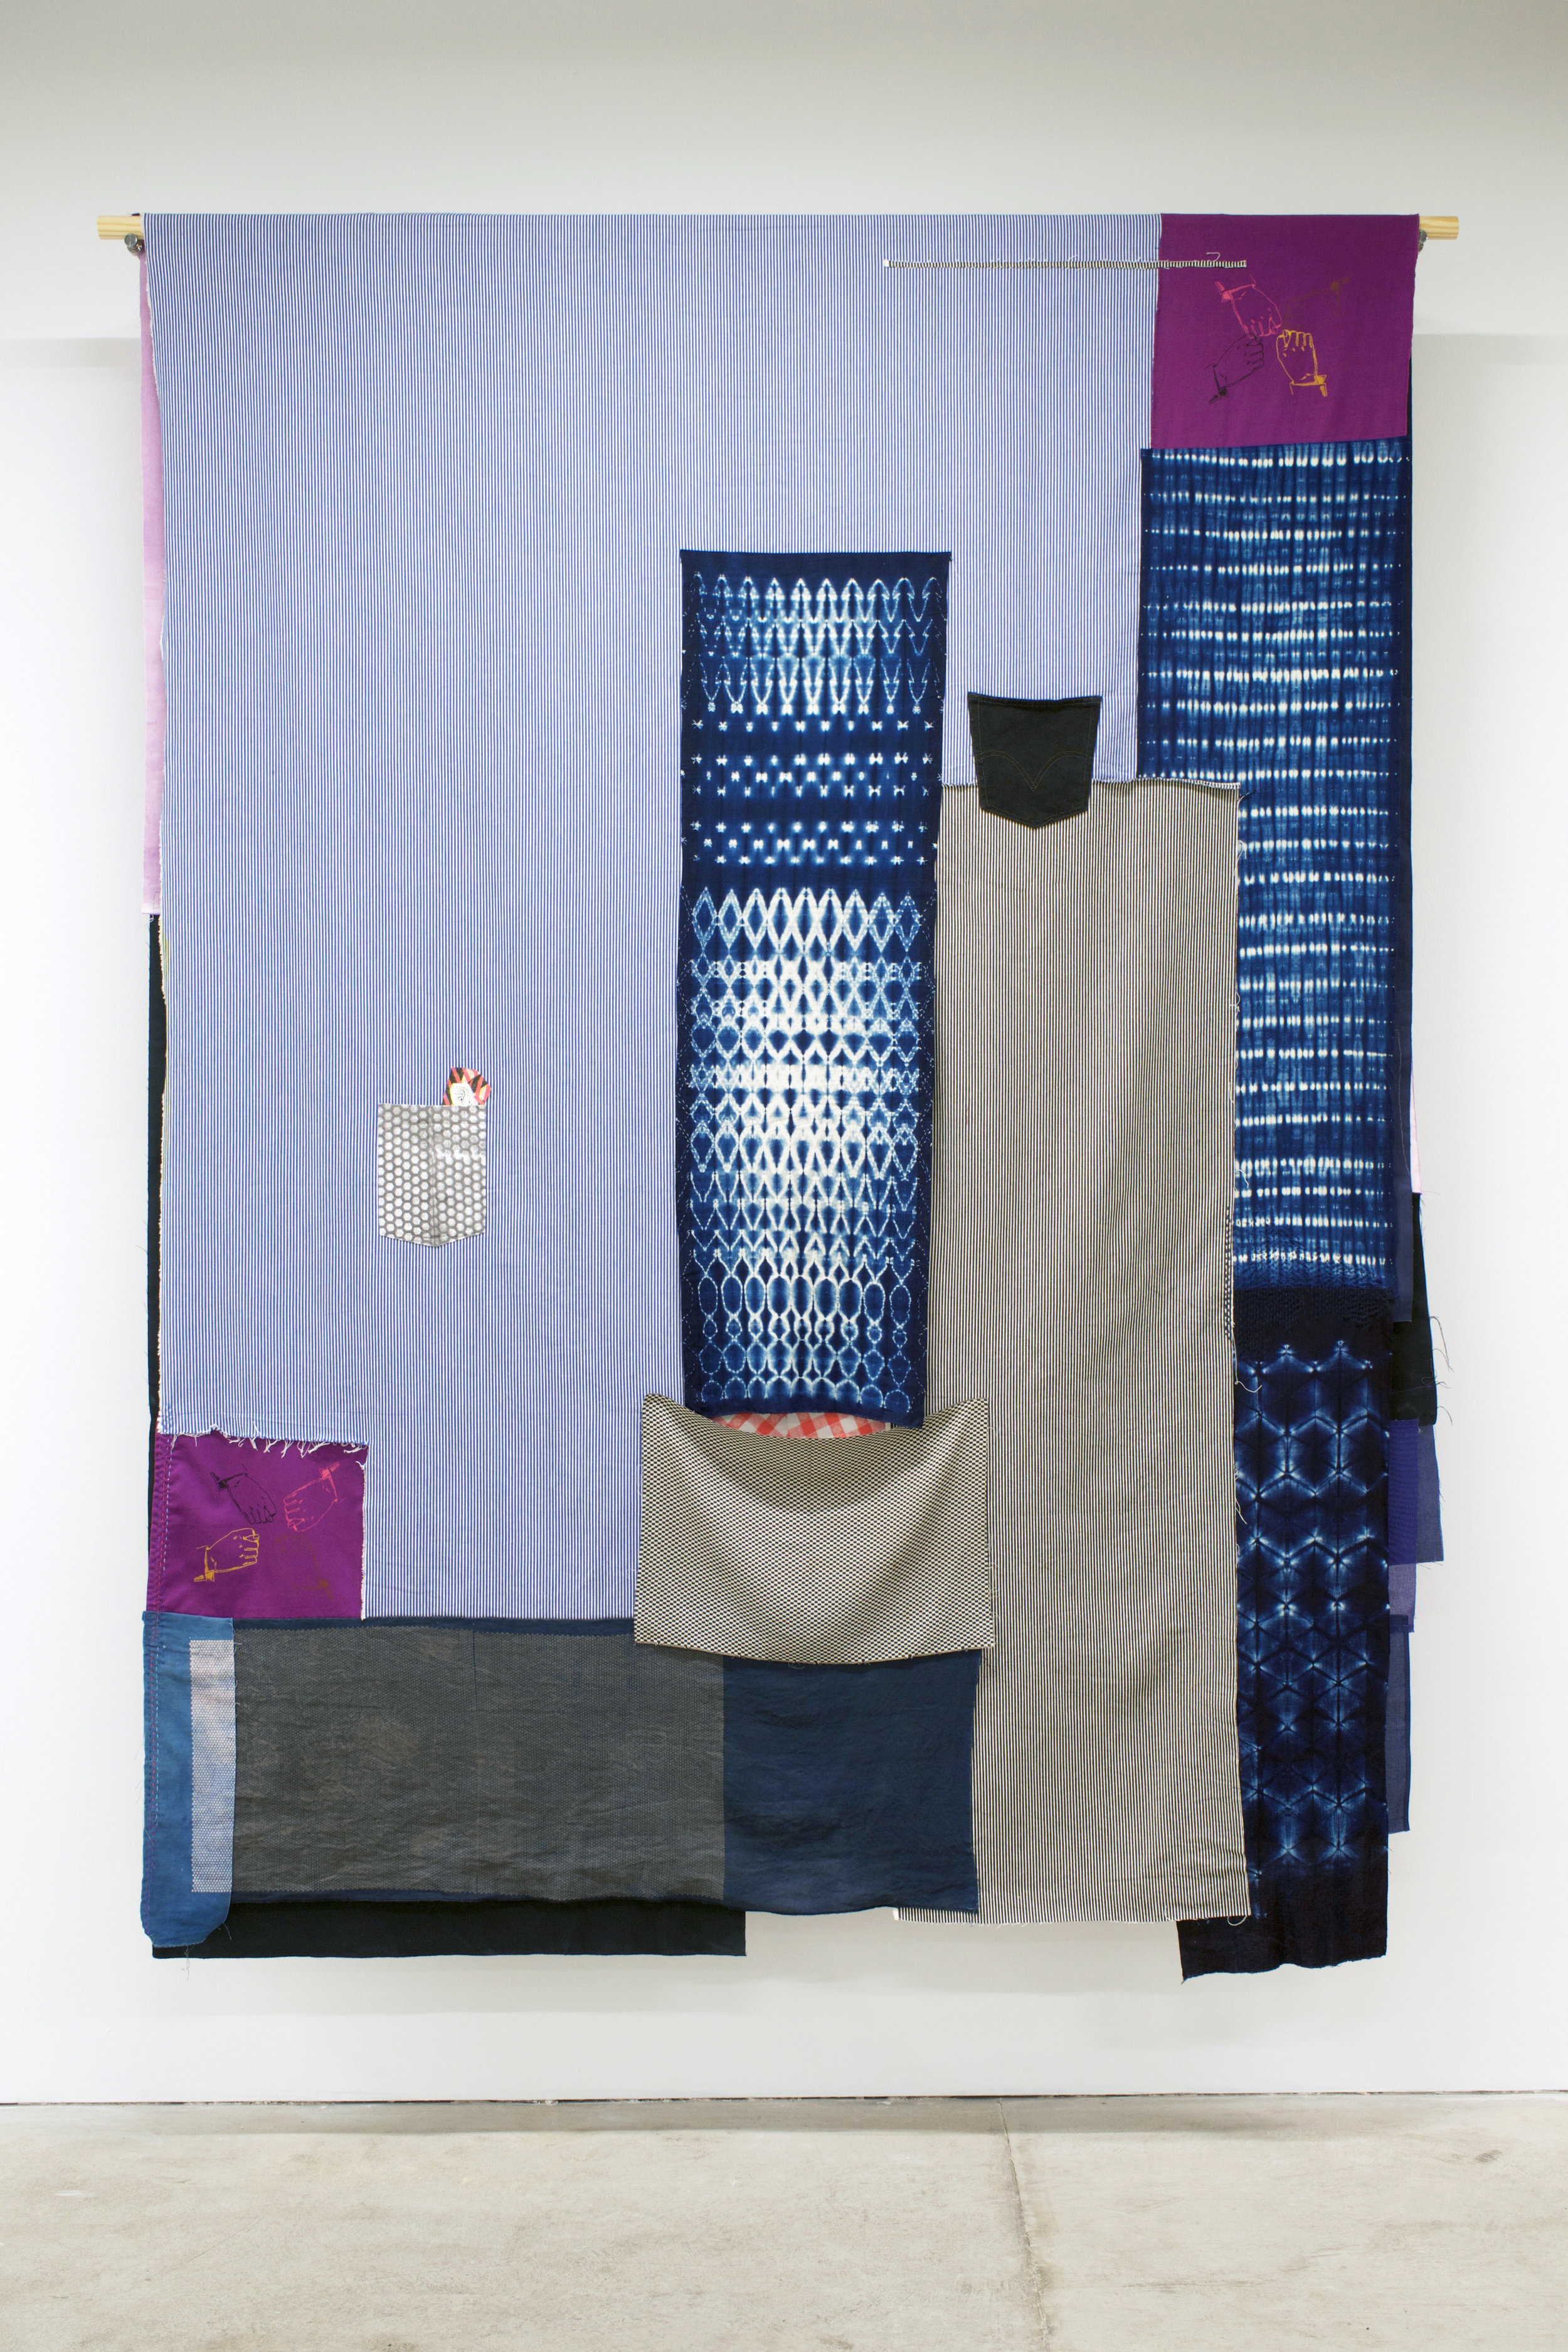   AMANDA CURRERI   Gestures (Proteggere, Rubare) , 2018 Hand-dyed and hand-printed fabrics with indigo, madder, soot/soya dyes and acrylic on various fabrics such as used table cloths, vintage Japanese linen, and cotton kimono fabric; vintage Japanes